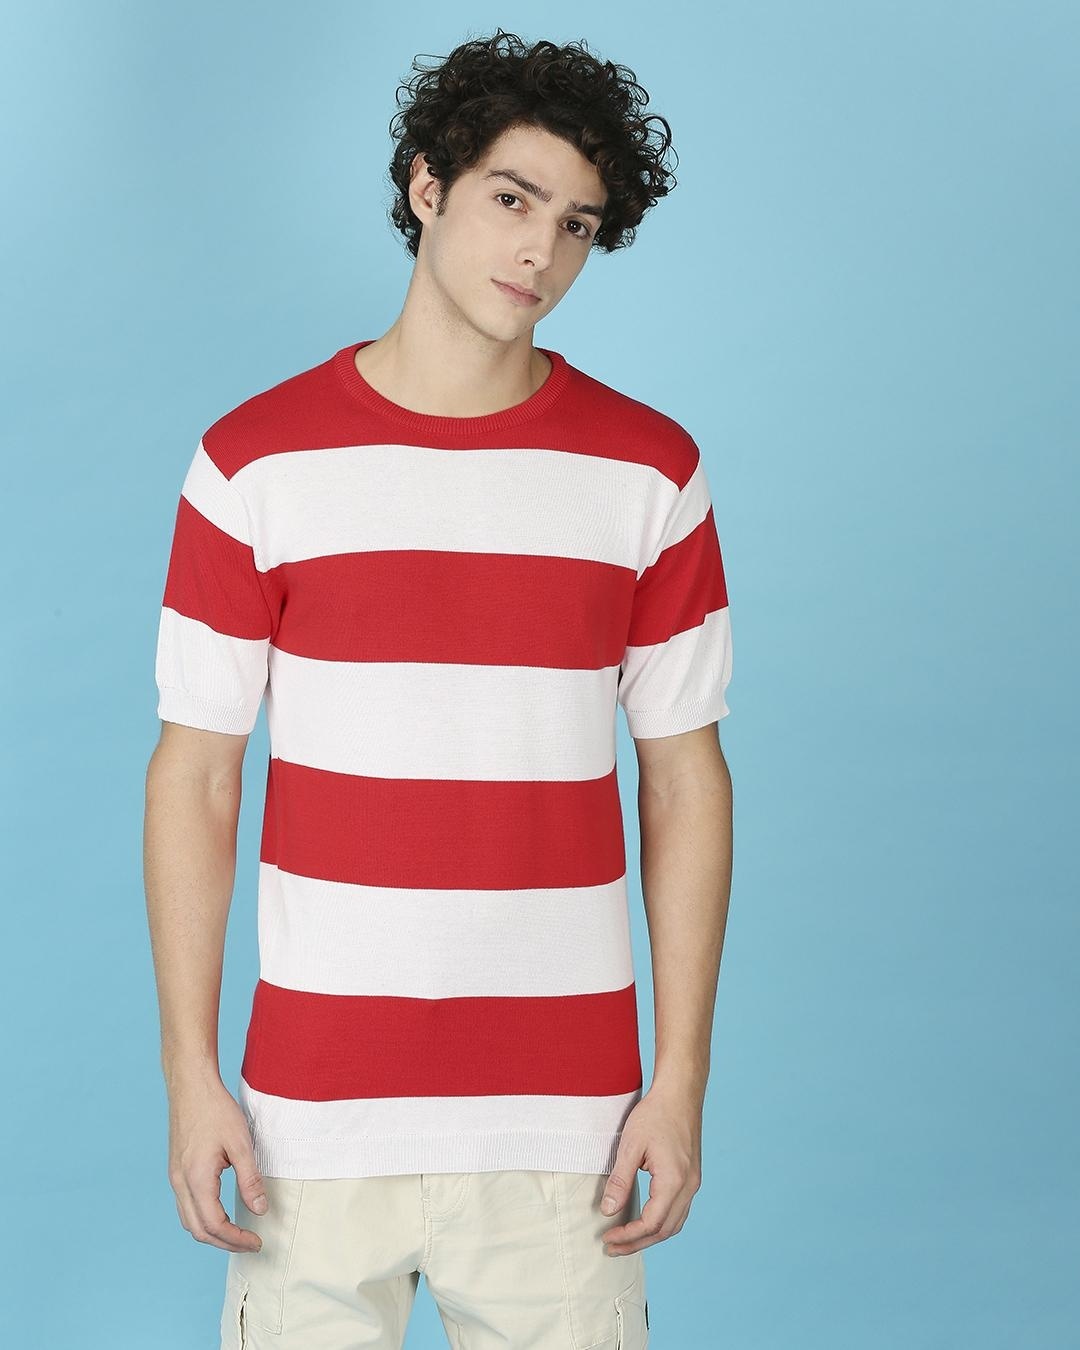 Buy Men's Red & Striped Knitted Slim Fit T-shirt for Men Online at Bewakoof